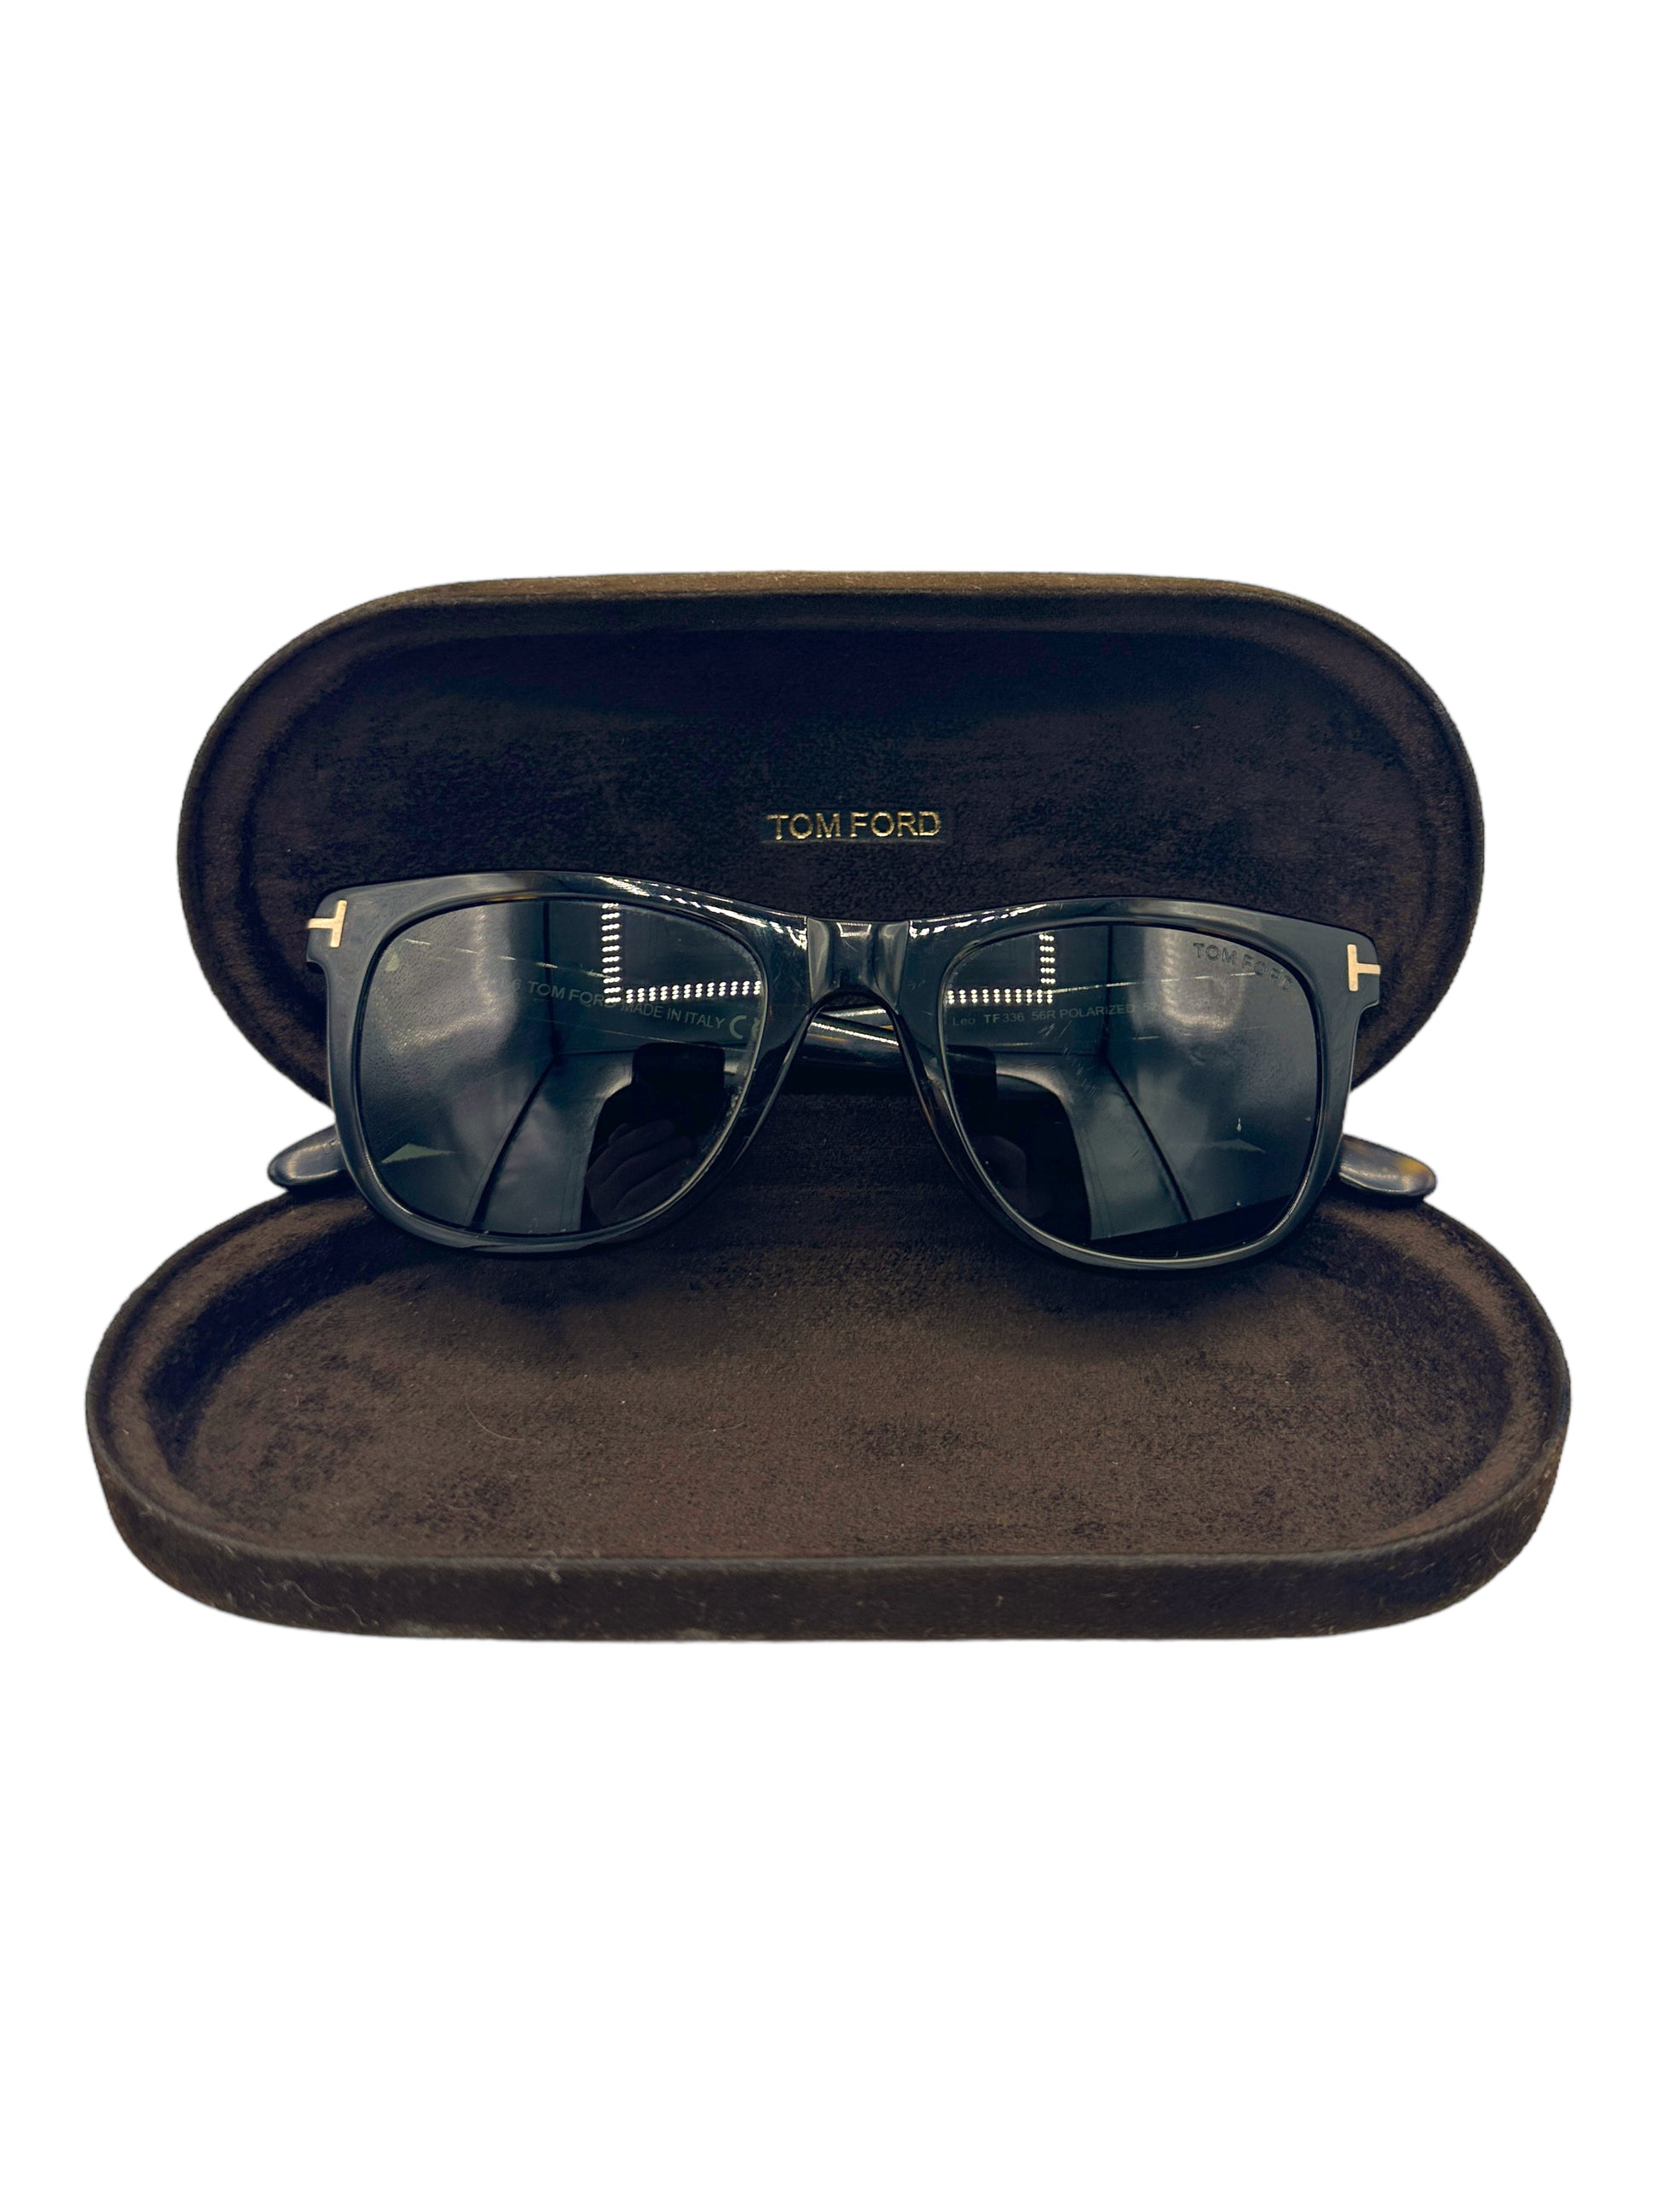 Tom Ford Brown Tortoiseshell Snowdon Sunglasses - Genuine Design Luxury Consignment for Men. New & Pre-Owned Clothing, Shoes, & Accessories. Calgary, Canada